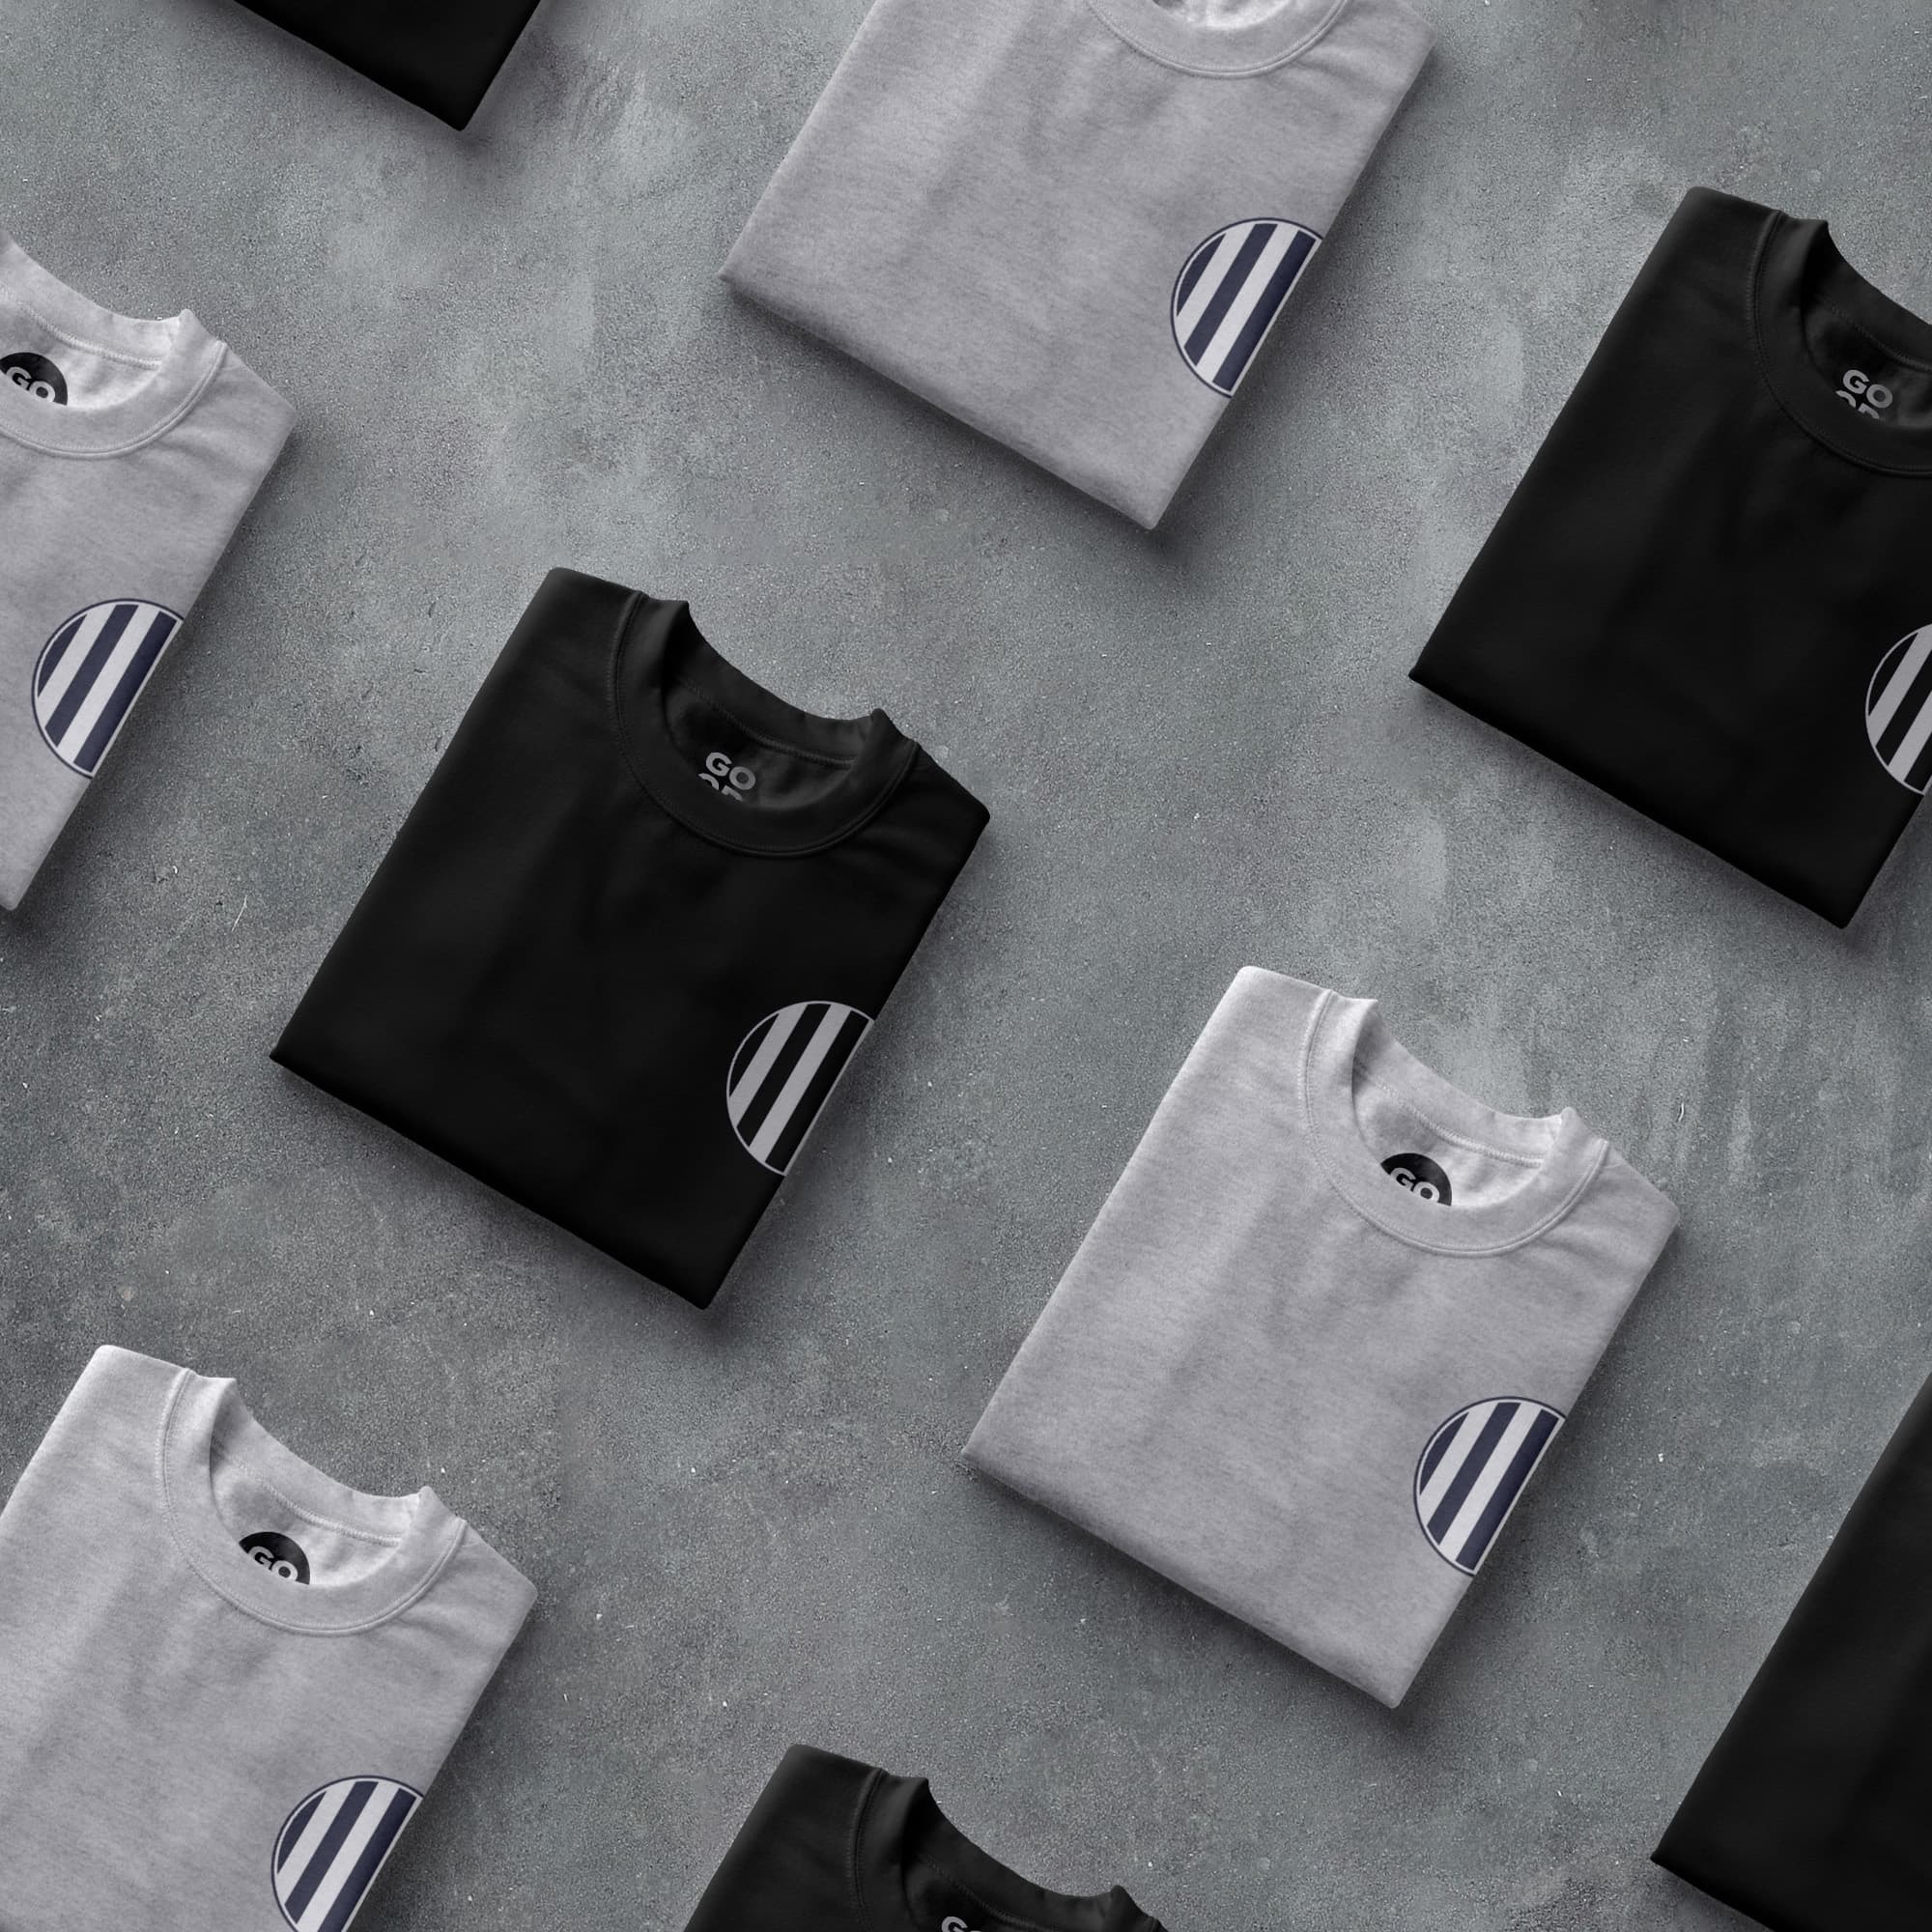 a group of black and white shirts sitting next to each other